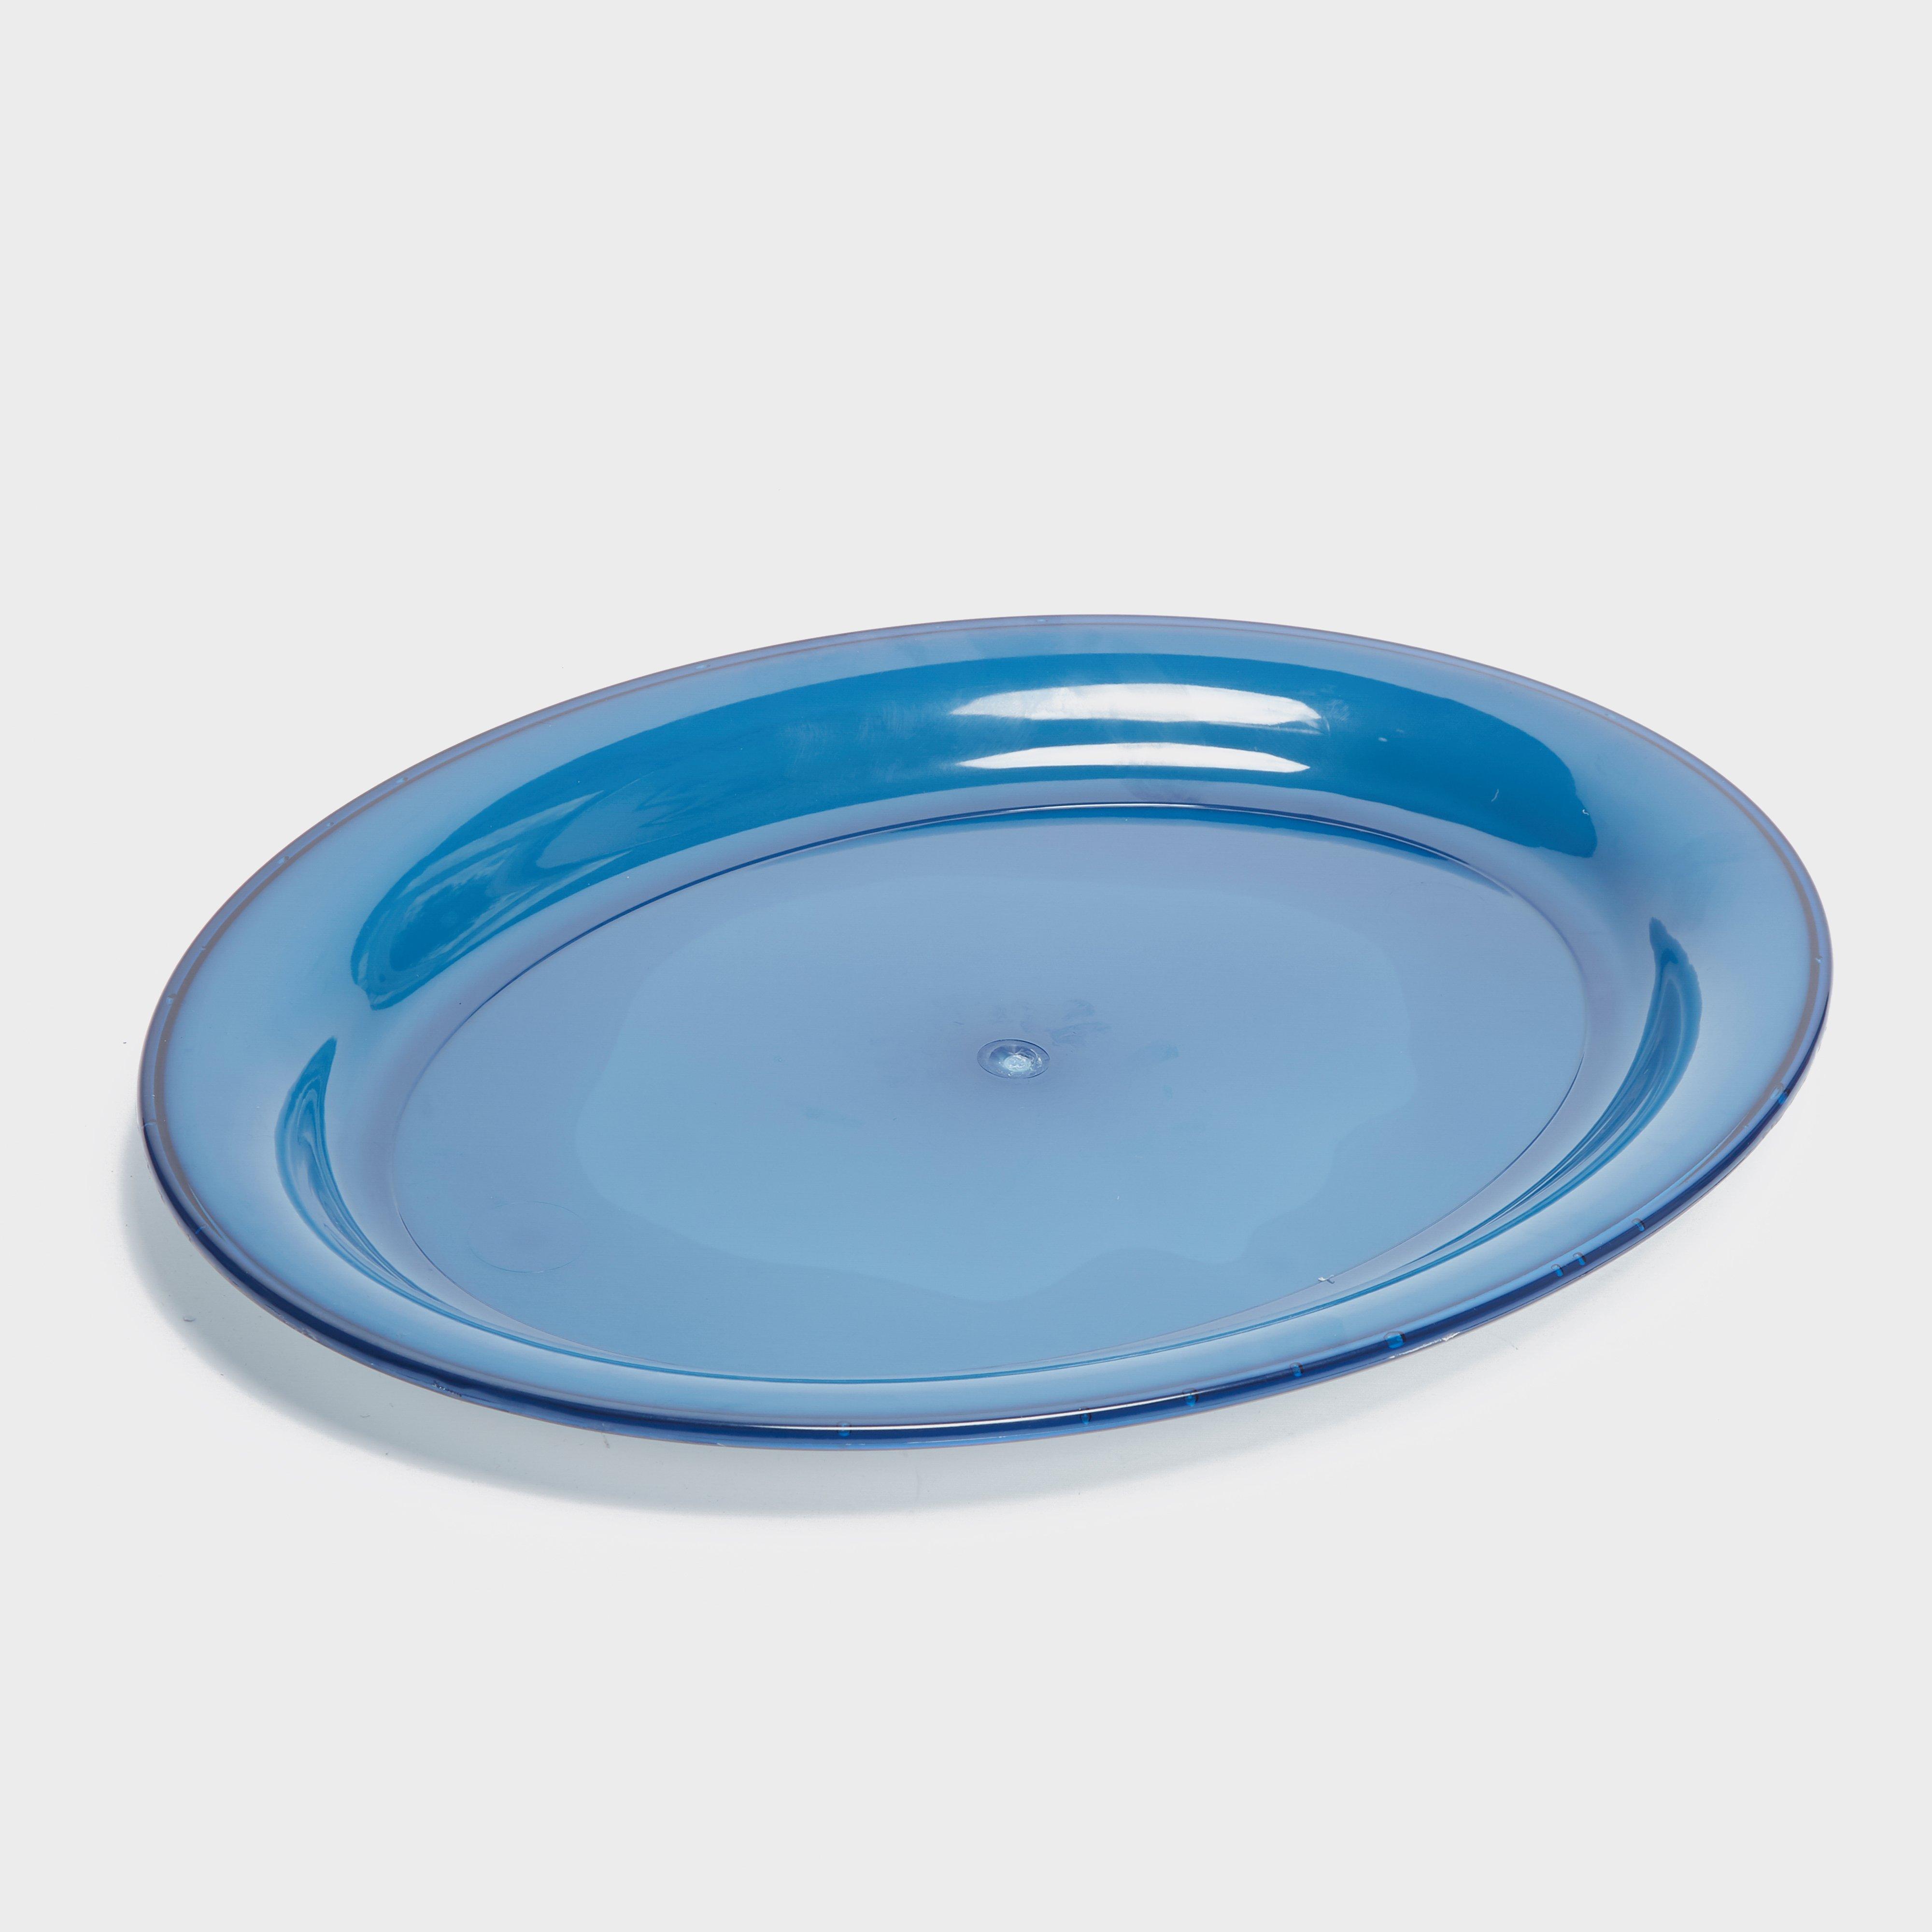 Hi-gear Deluxe Plate (large) - Blue/bbl  Blue/bbl